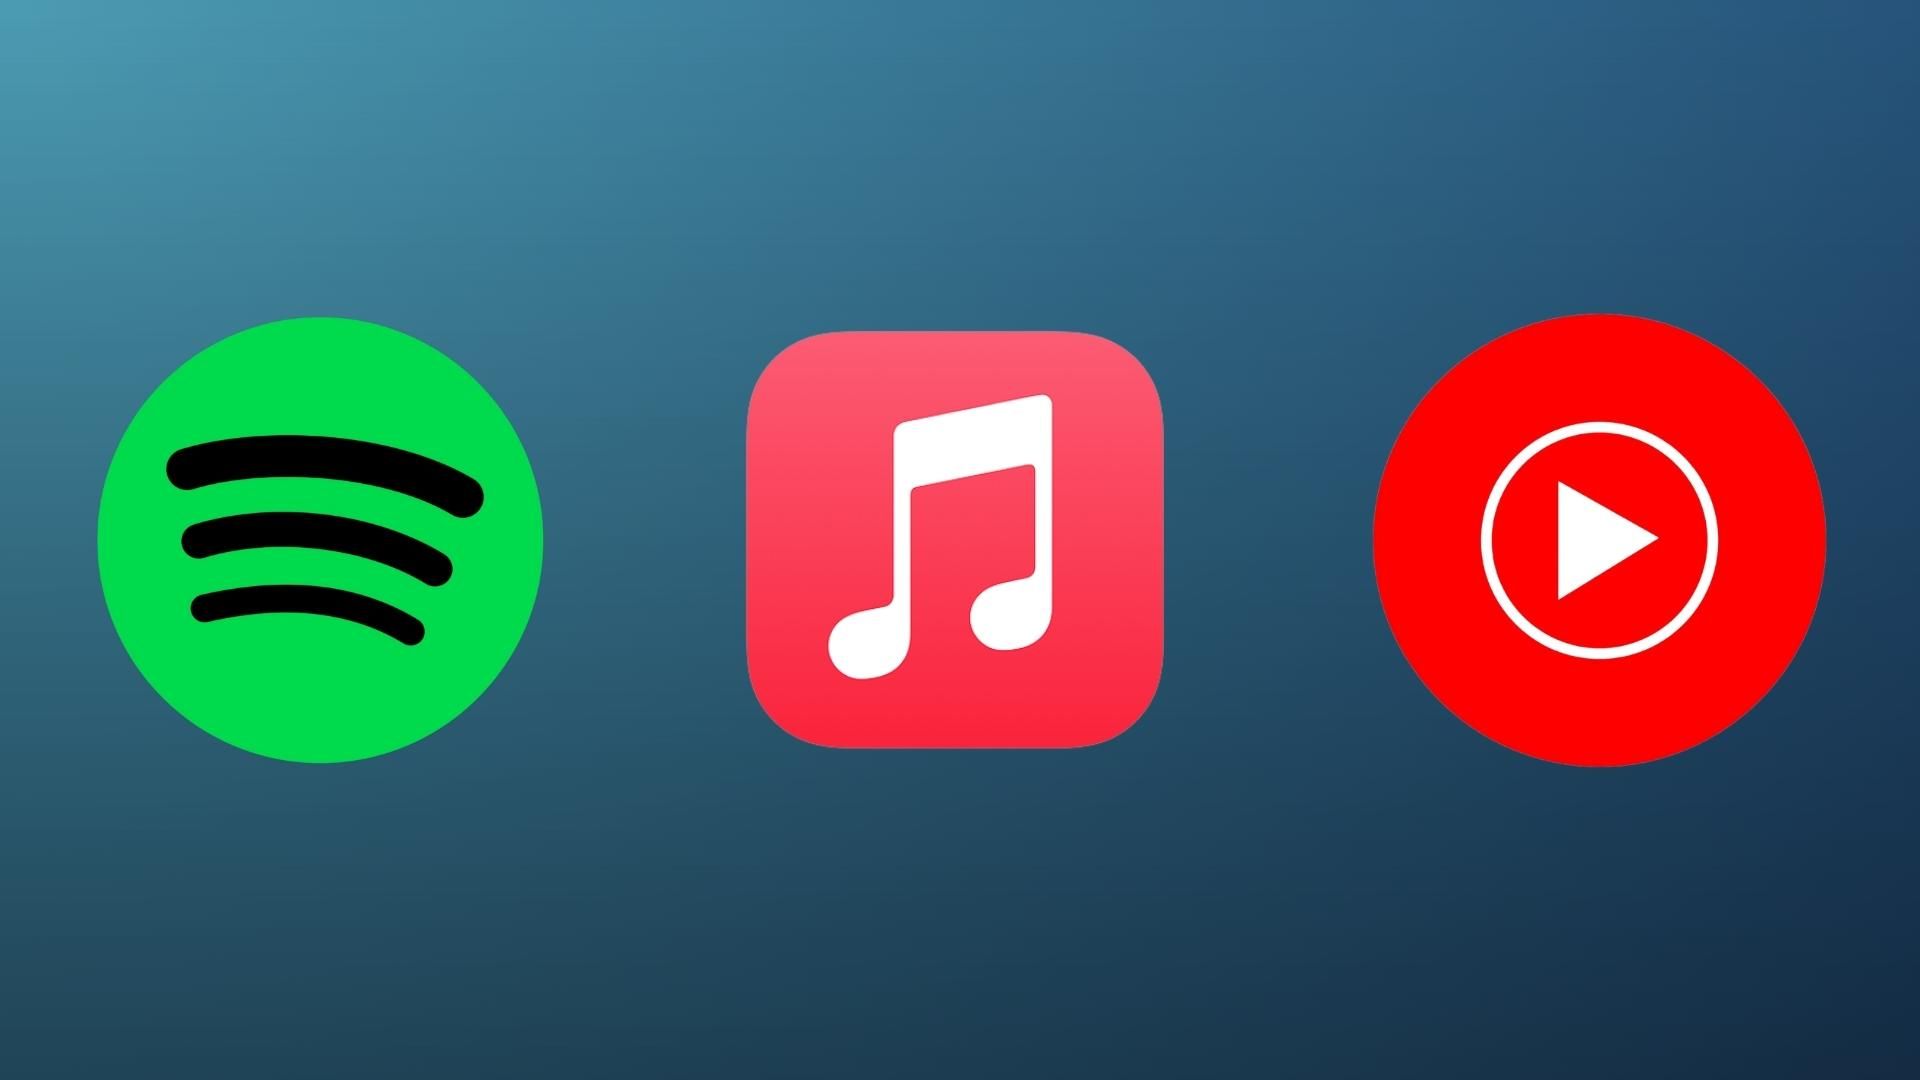 Spotify vs. Apple Music vs. YouTube Music: Which One Is Better?